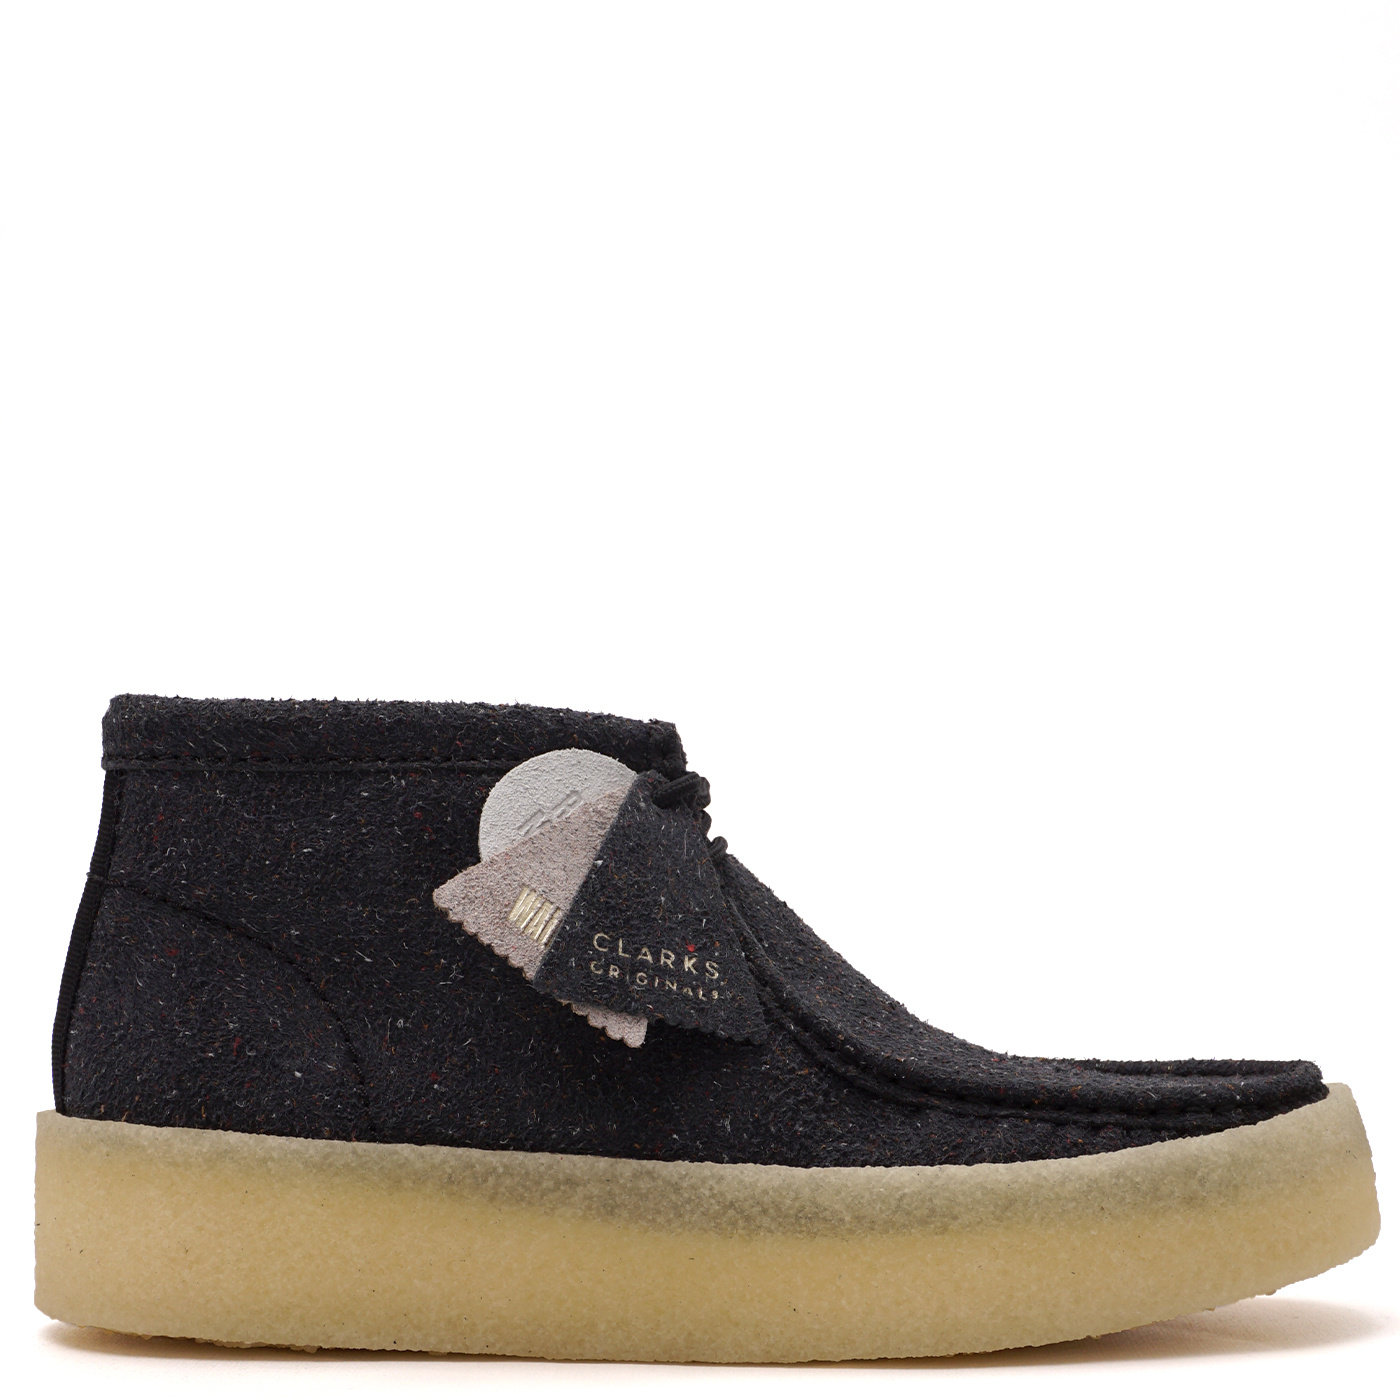 Clarks Wallabee Cup Boot - Black Eco Leather